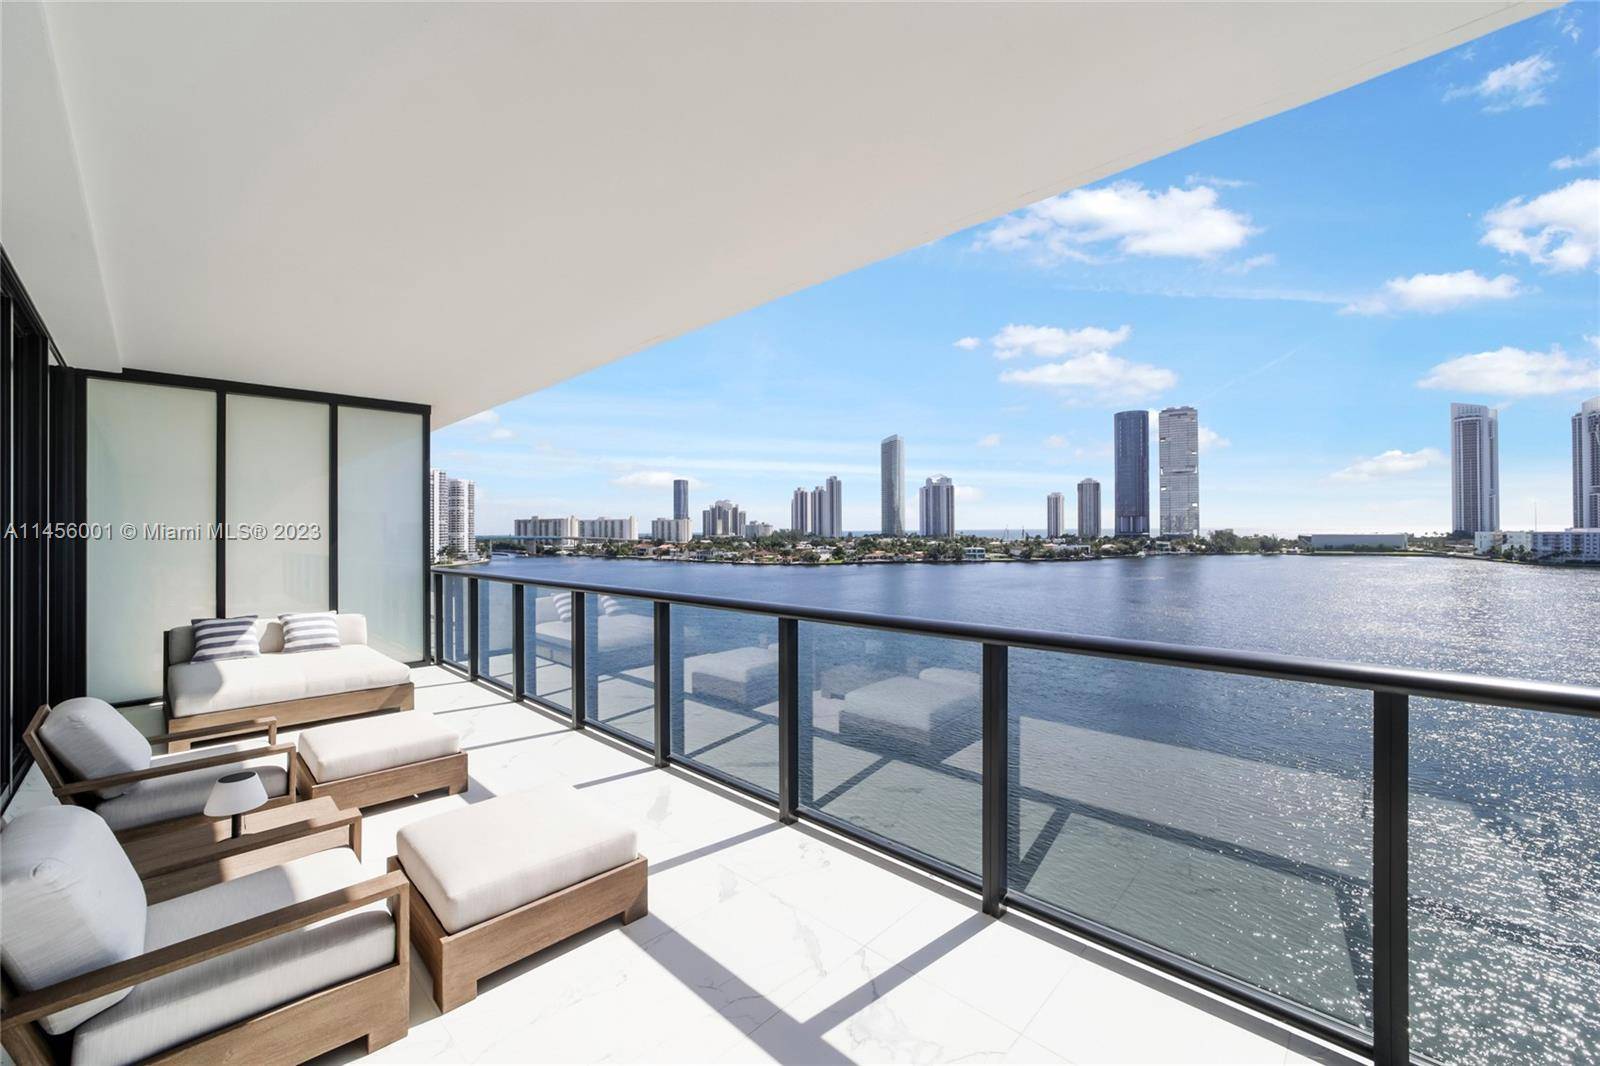 VIEWS GALORE ! Welcome to this spectacular waterfront residence 707N at the one of a kind PRIVE CONDOMINIUM, a secluded boaters paradise enclave phenomenally situated on an eight acre private ...